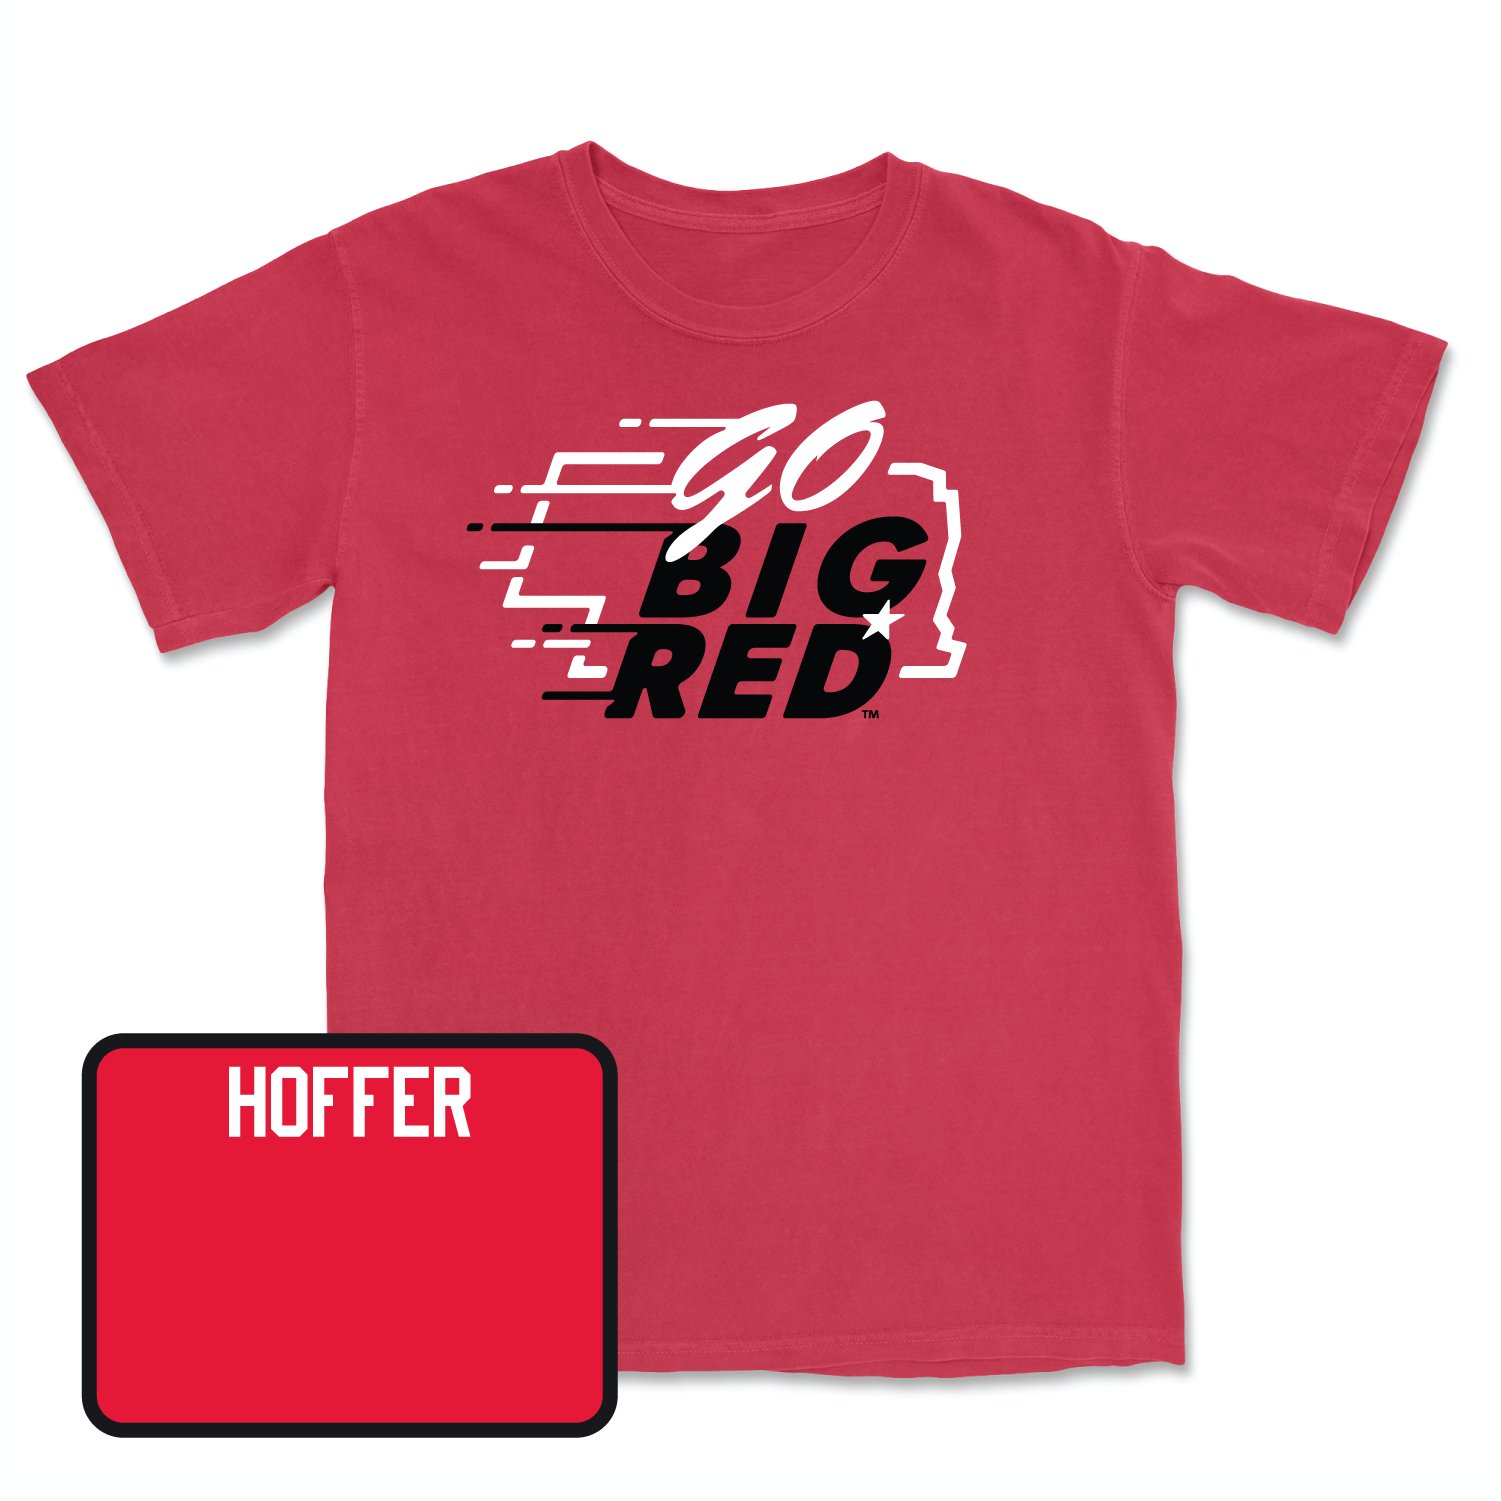 Red Track & Field GBR Tee Youth Small / Michael Hoffer